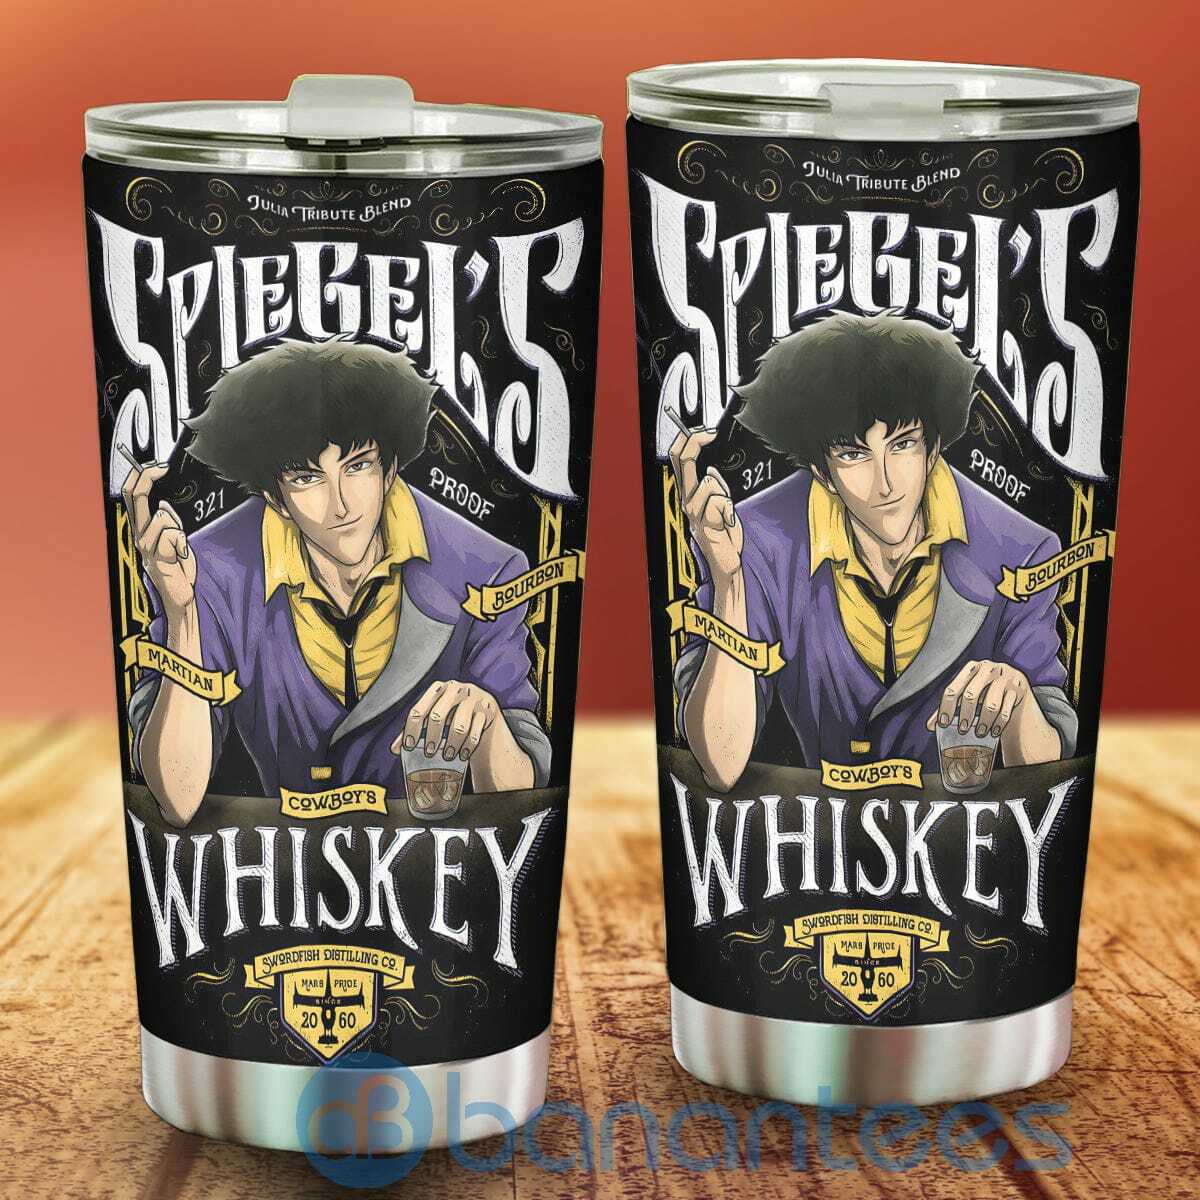 Cowboy Bebop Anime Tumblers Spiegel?s Whiskey For Fans